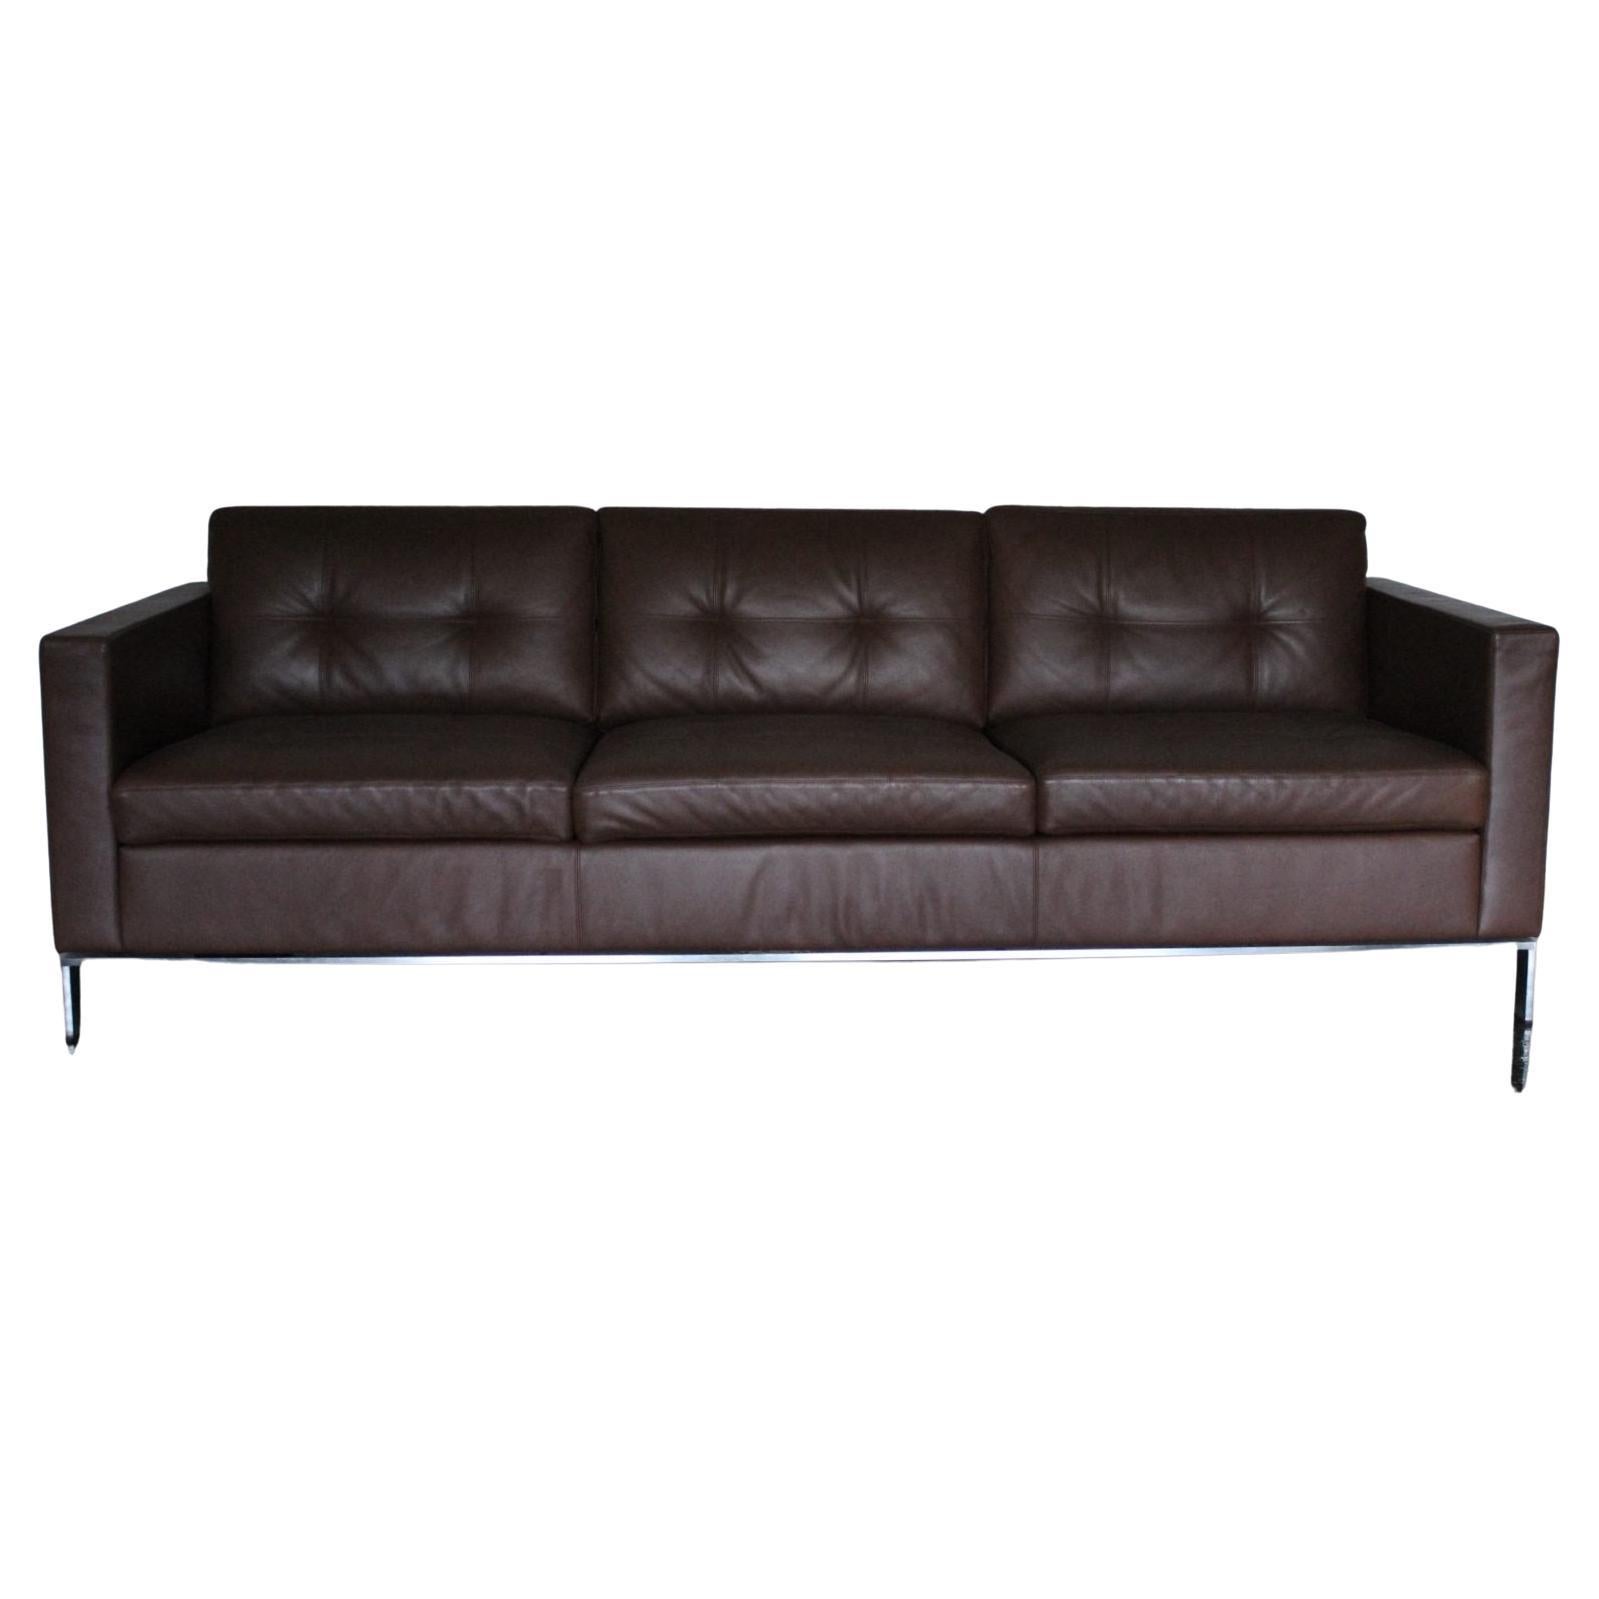 Walter Knoll “Foster 502.30” 3-Seat Sofa – In Dark Brown Leather For Sale